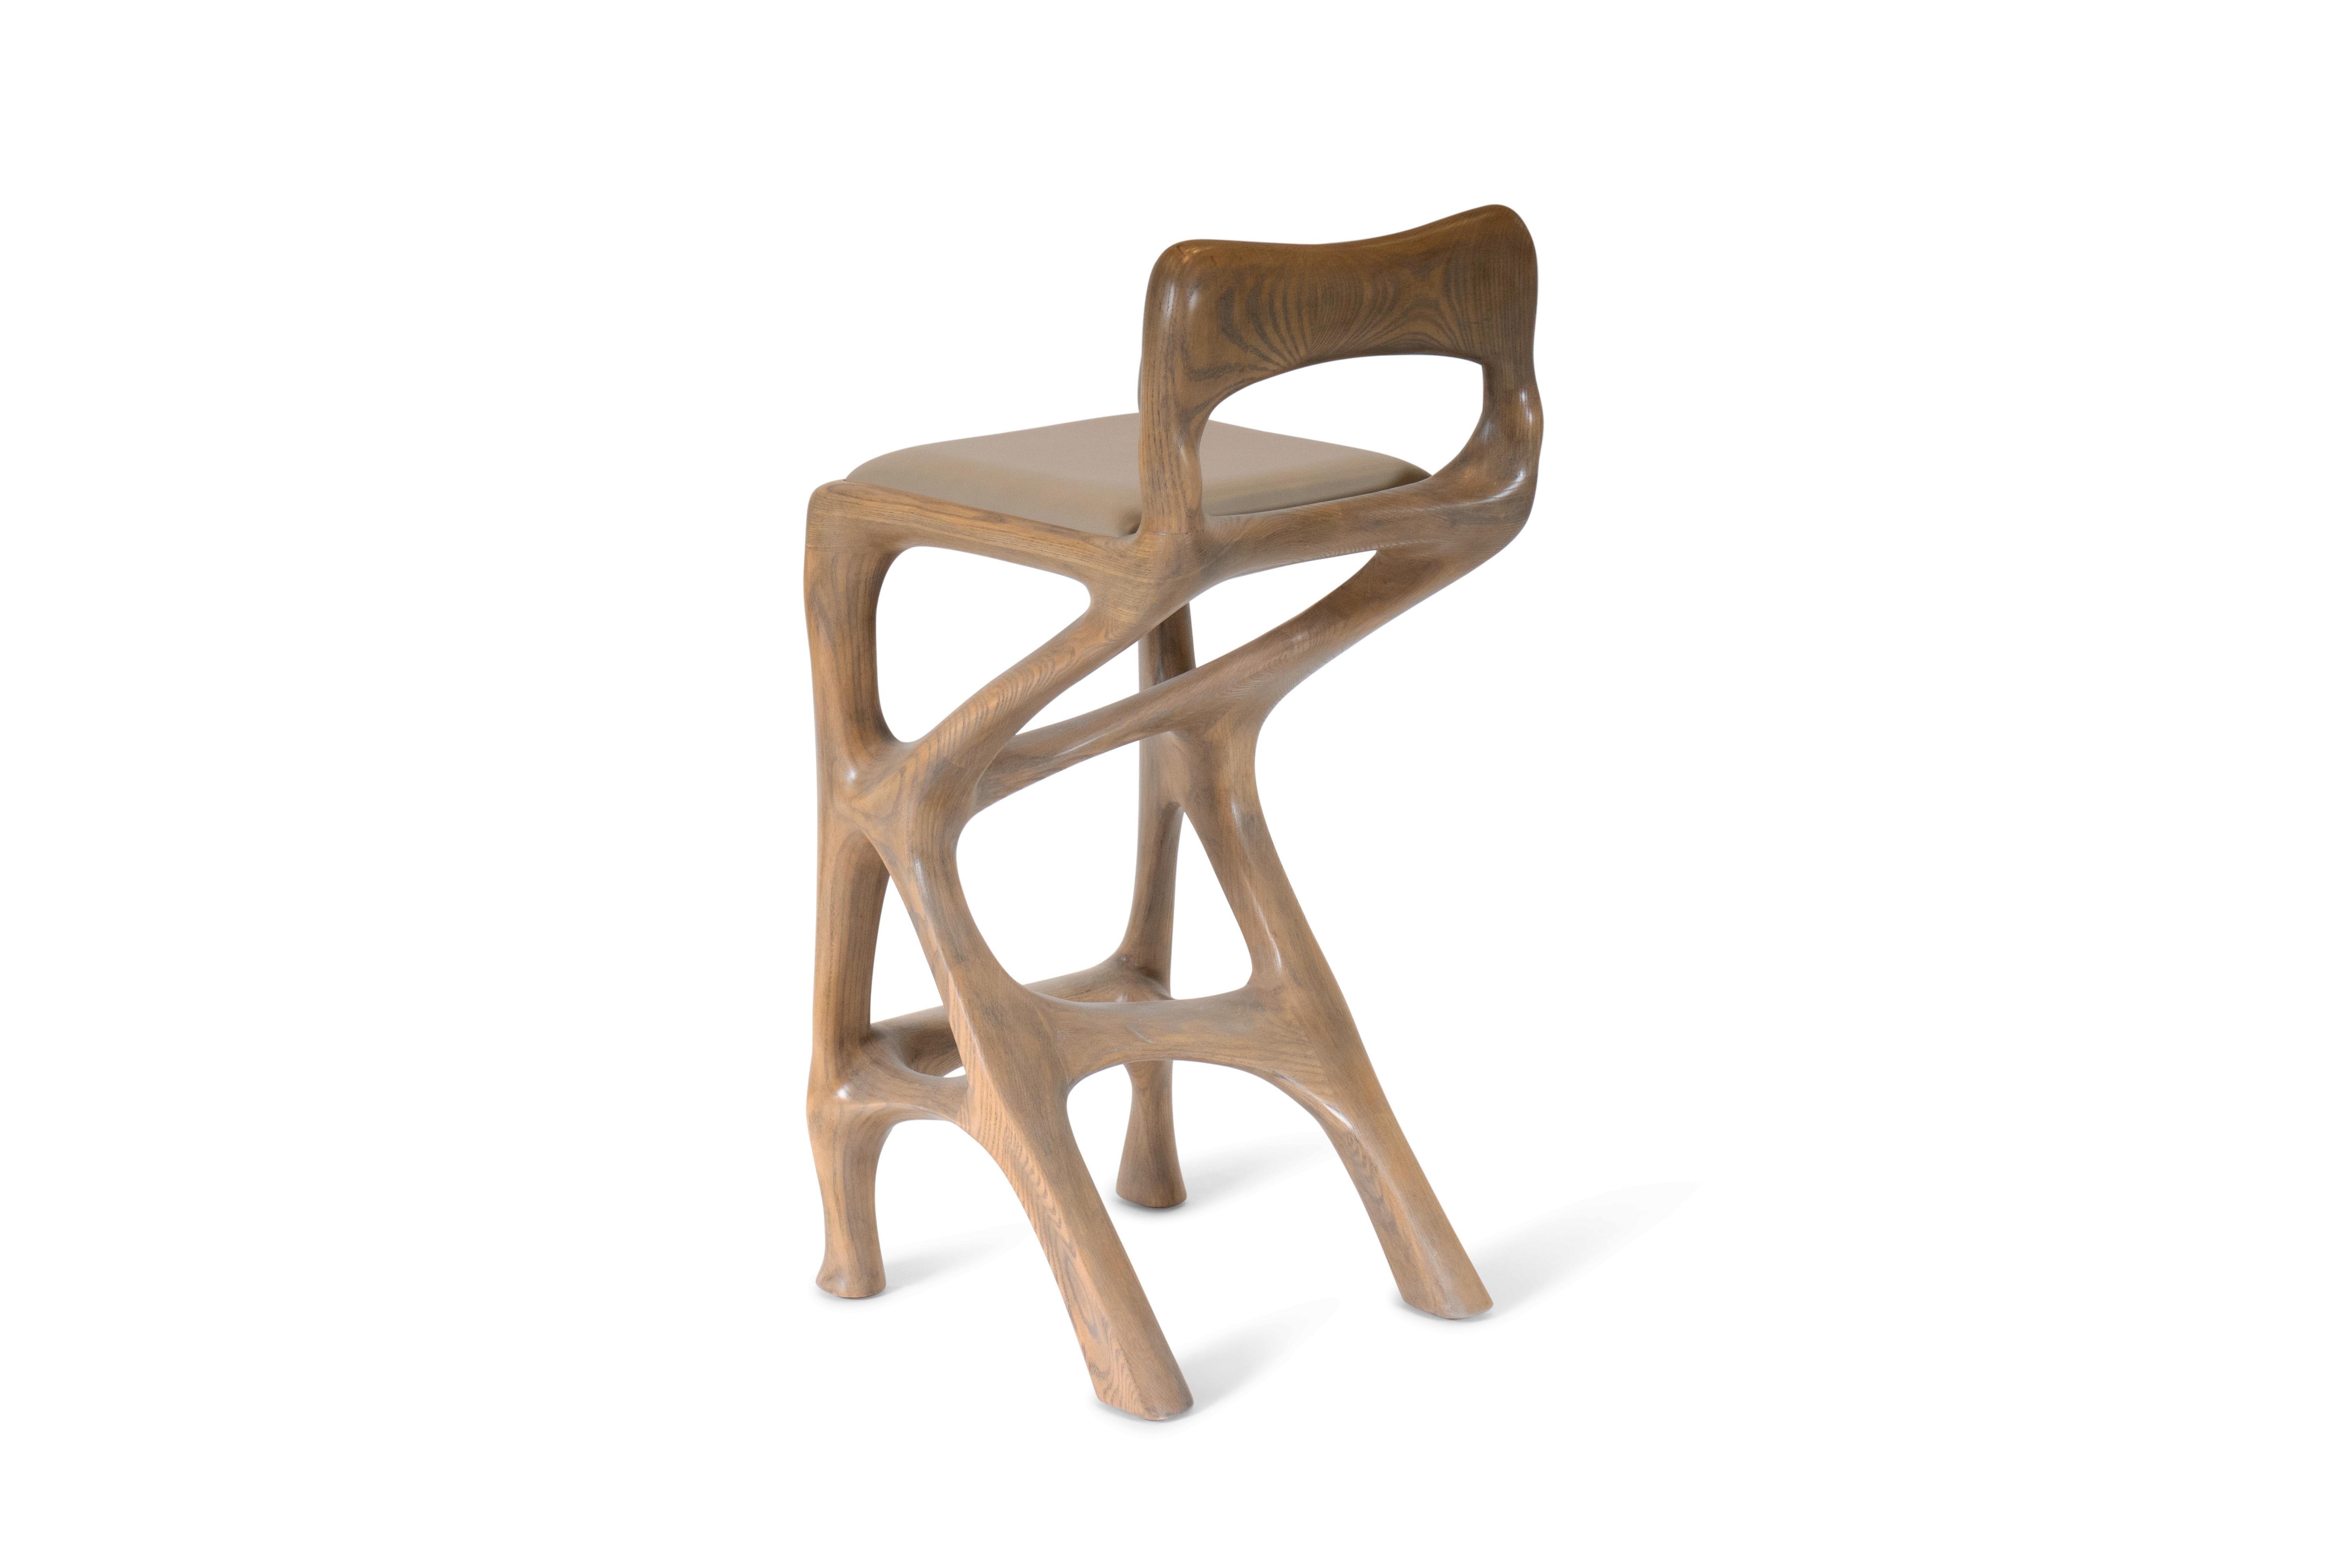 Organic Modern Amorph Chimera Bar Stool with Back in Antique Oak stain on Ash wood  For Sale